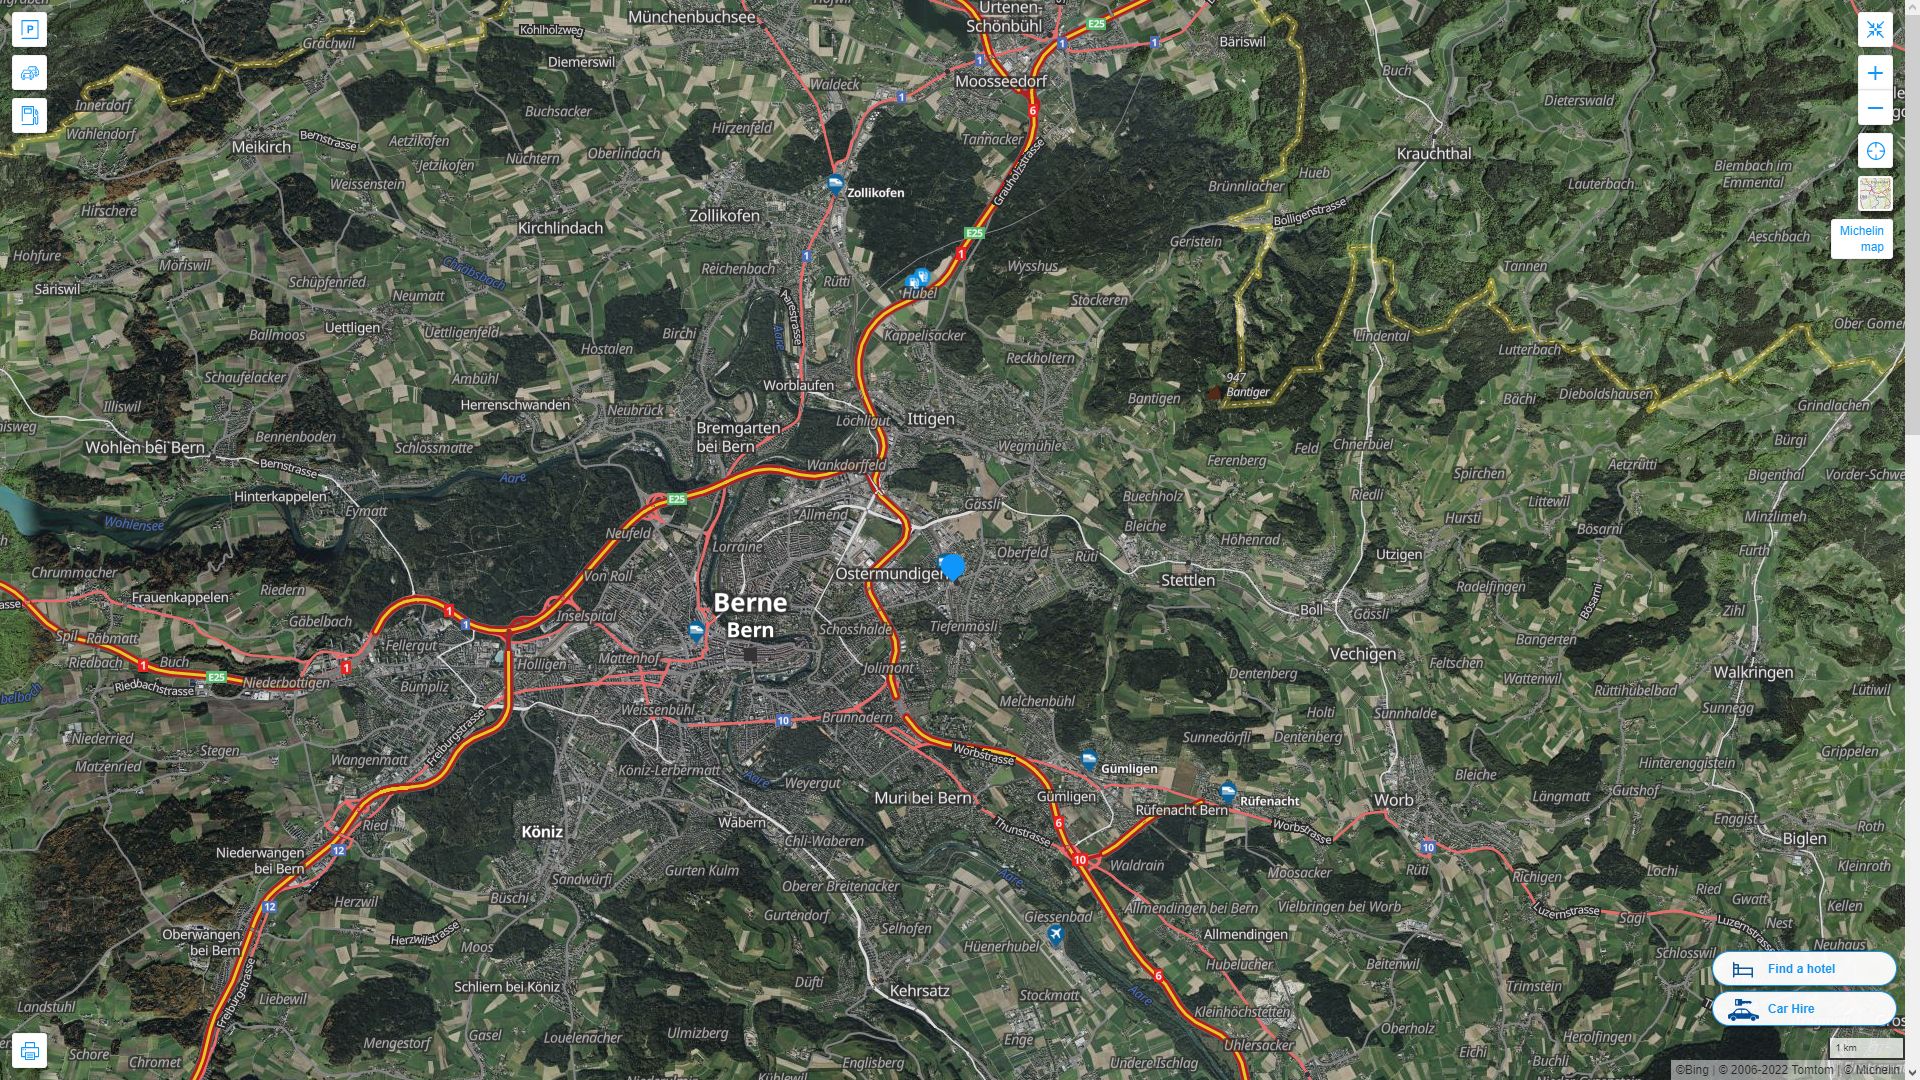 Ostermundigen Highway and Road Map with Satellite View